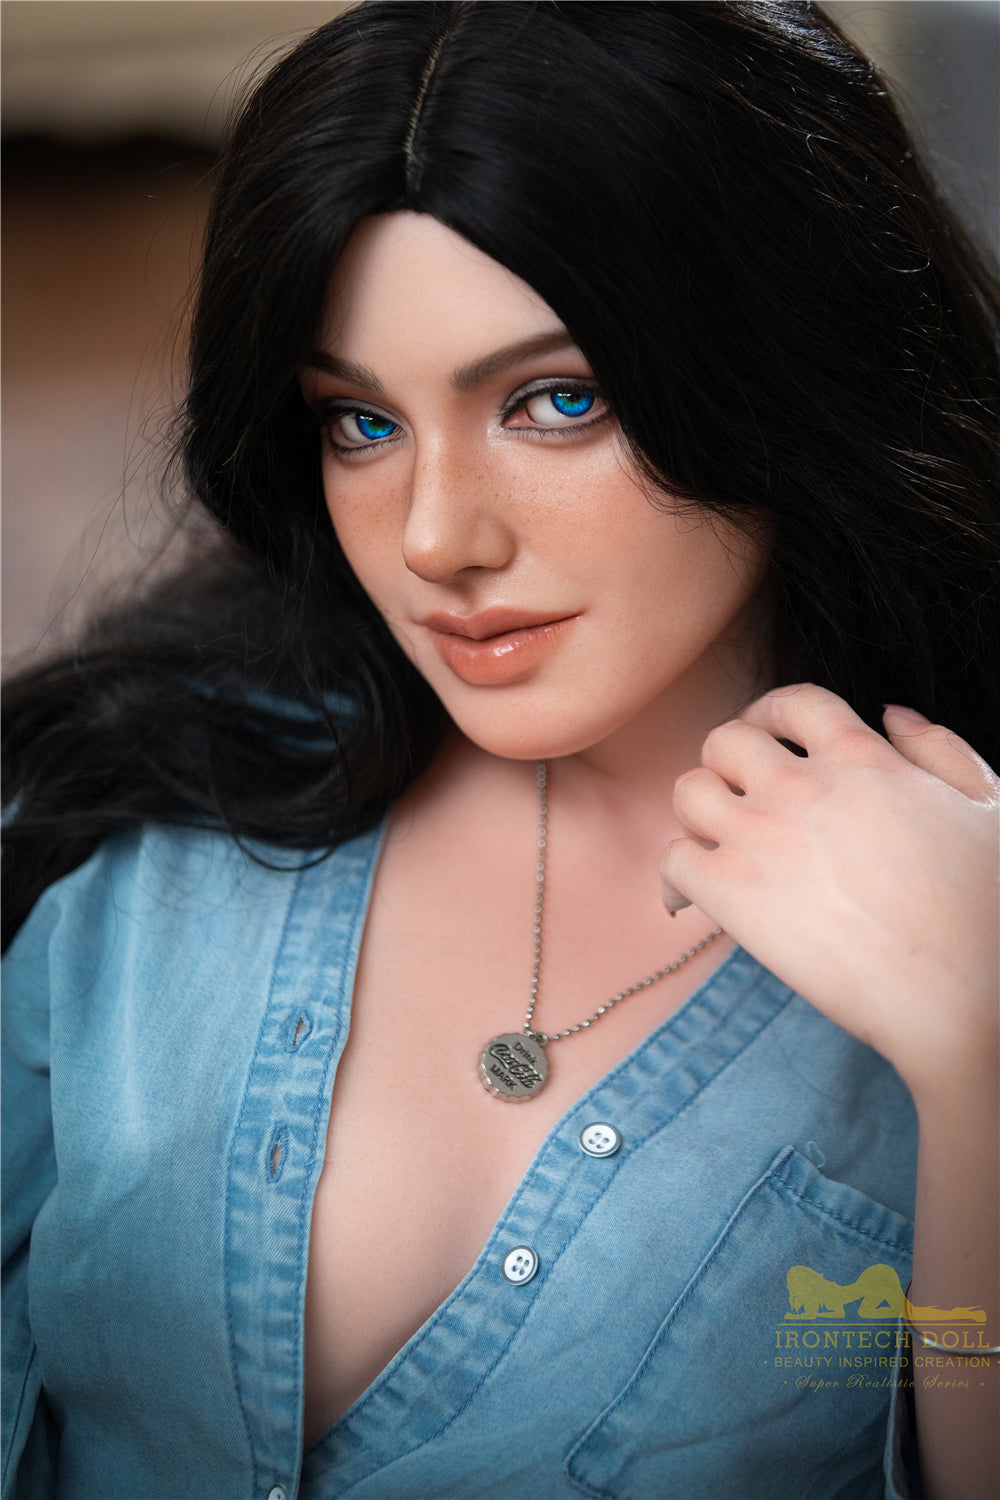 Irontech Doll 152 cm A Silicone - Ivy | Buy Sex Dolls at DOLLS ACTUALLY